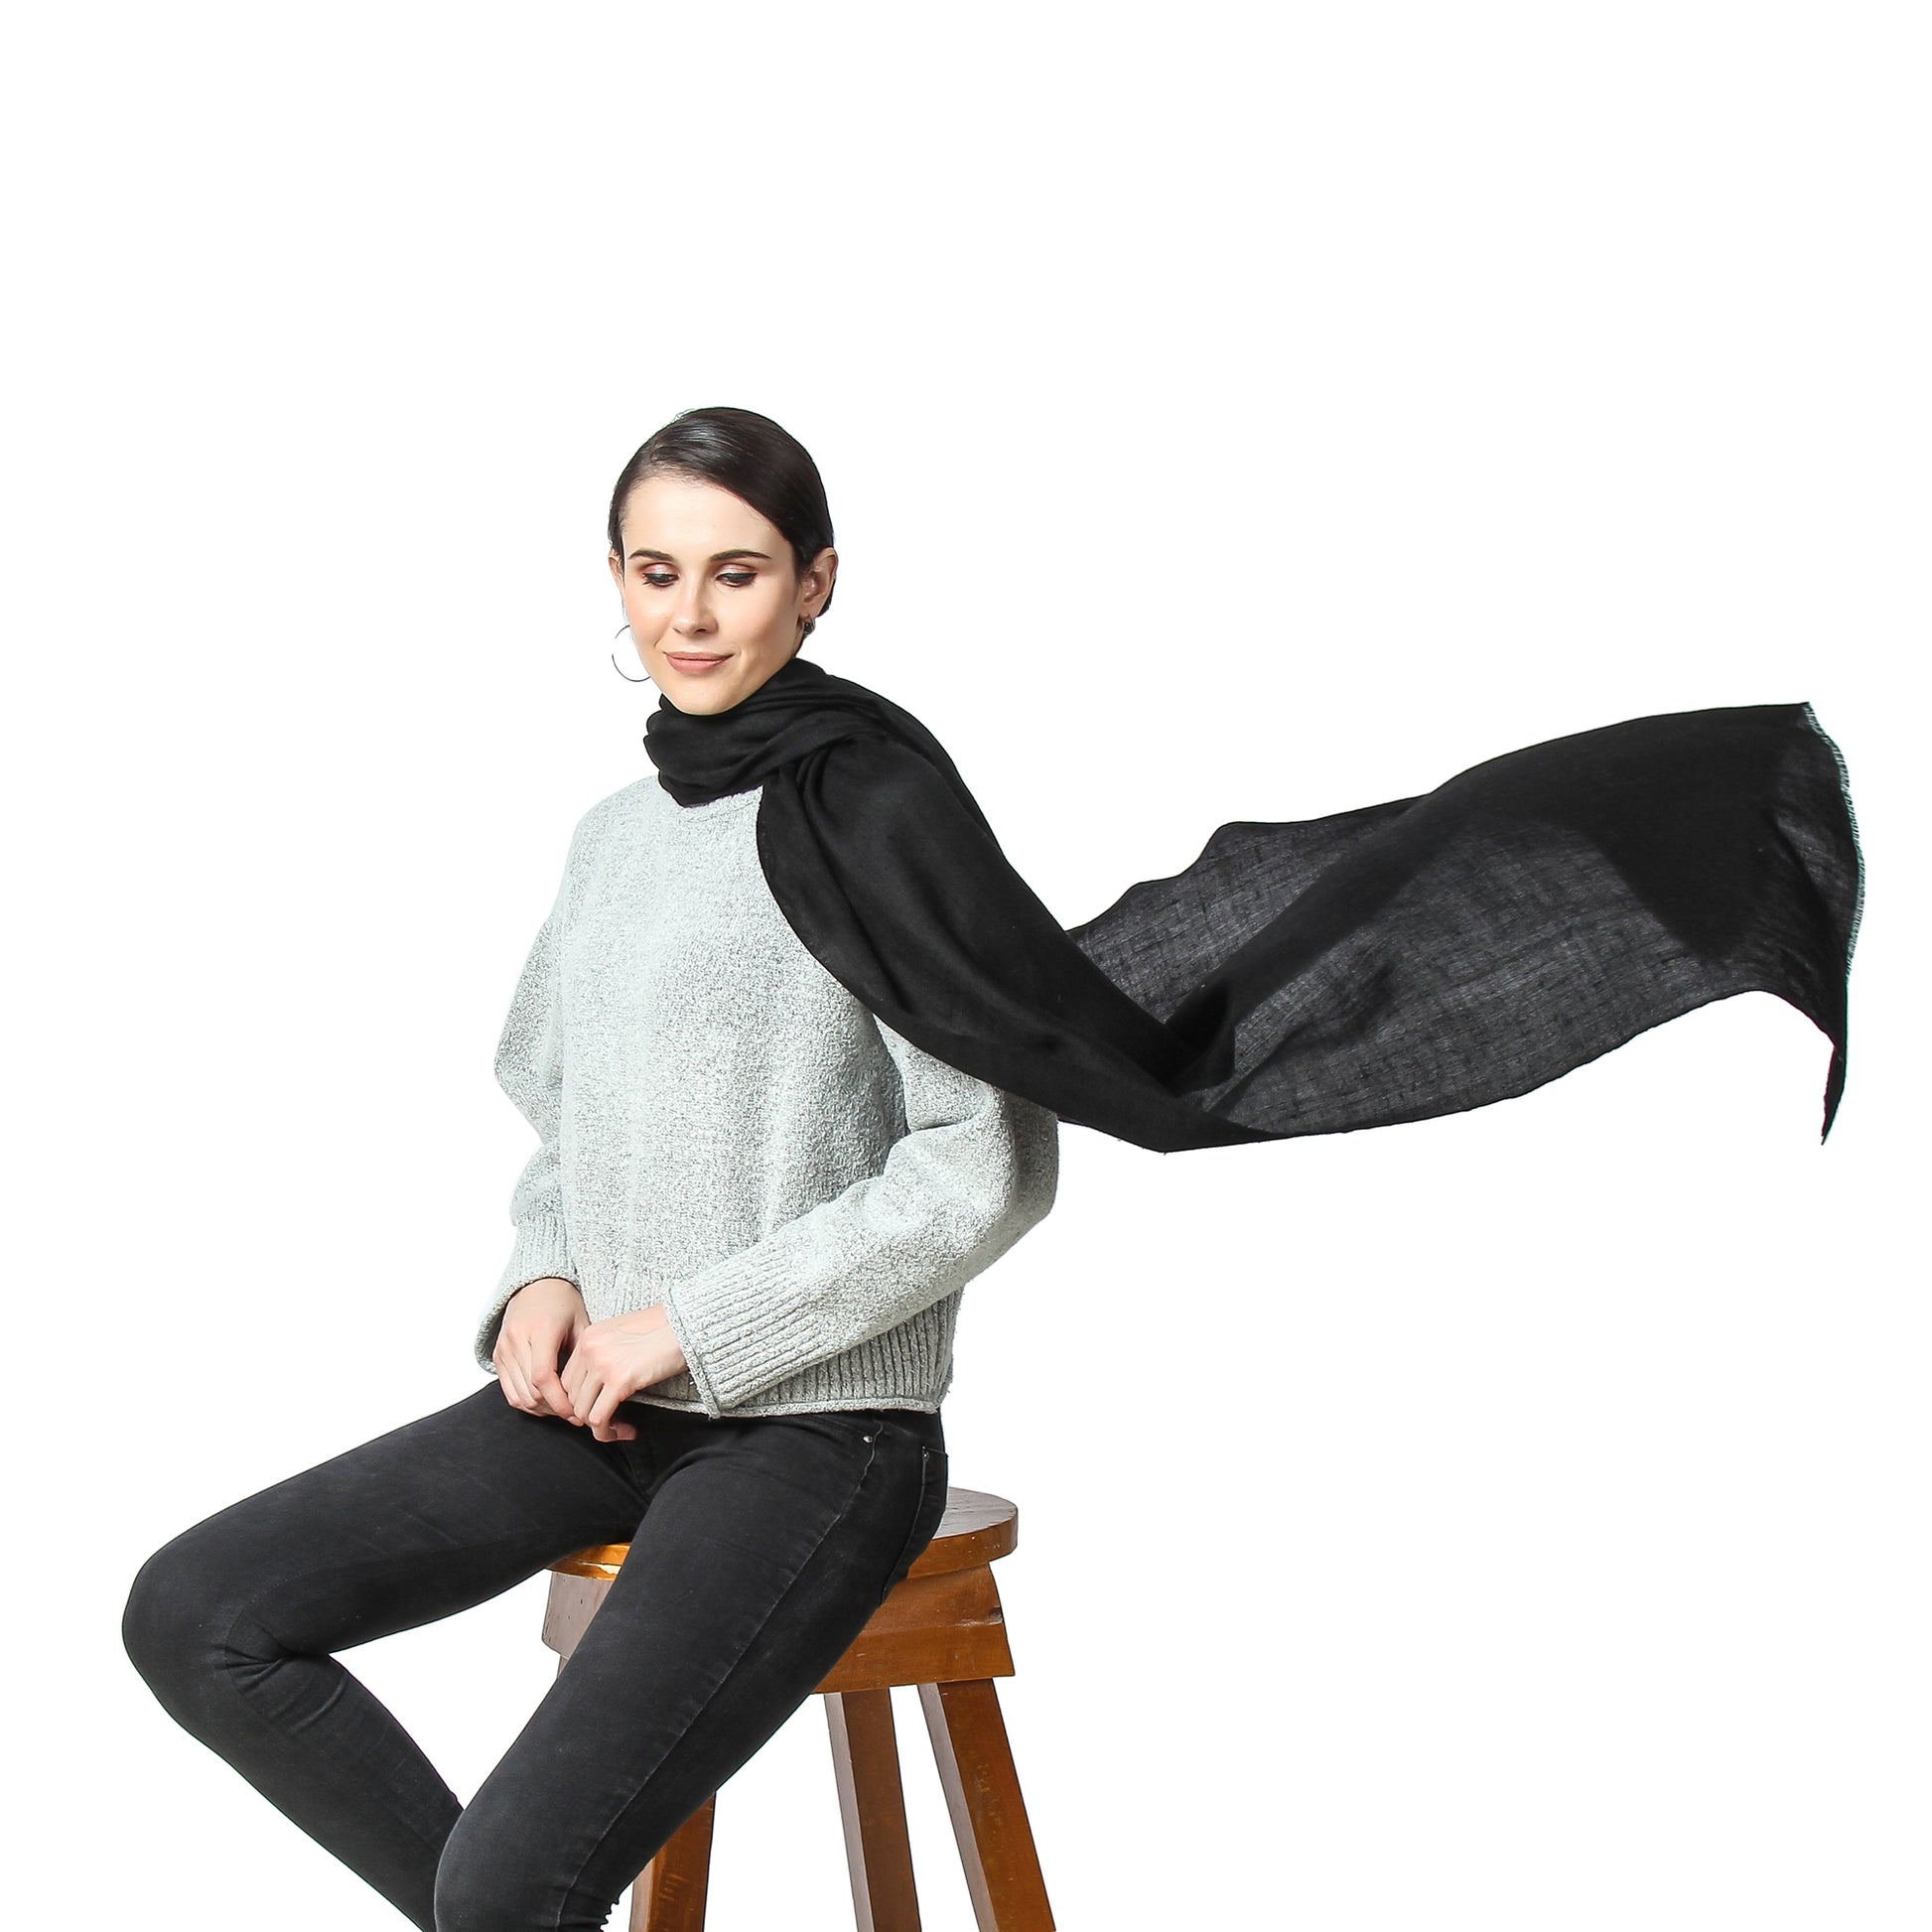 Image of a woman sitting on a stool, wearing a black cashmere scarf around her neck. One end of the scarf is blowing in the air, creating a dynamic and elegant effect. The woman's pose is relaxed and confident, with a slight smile on her face.